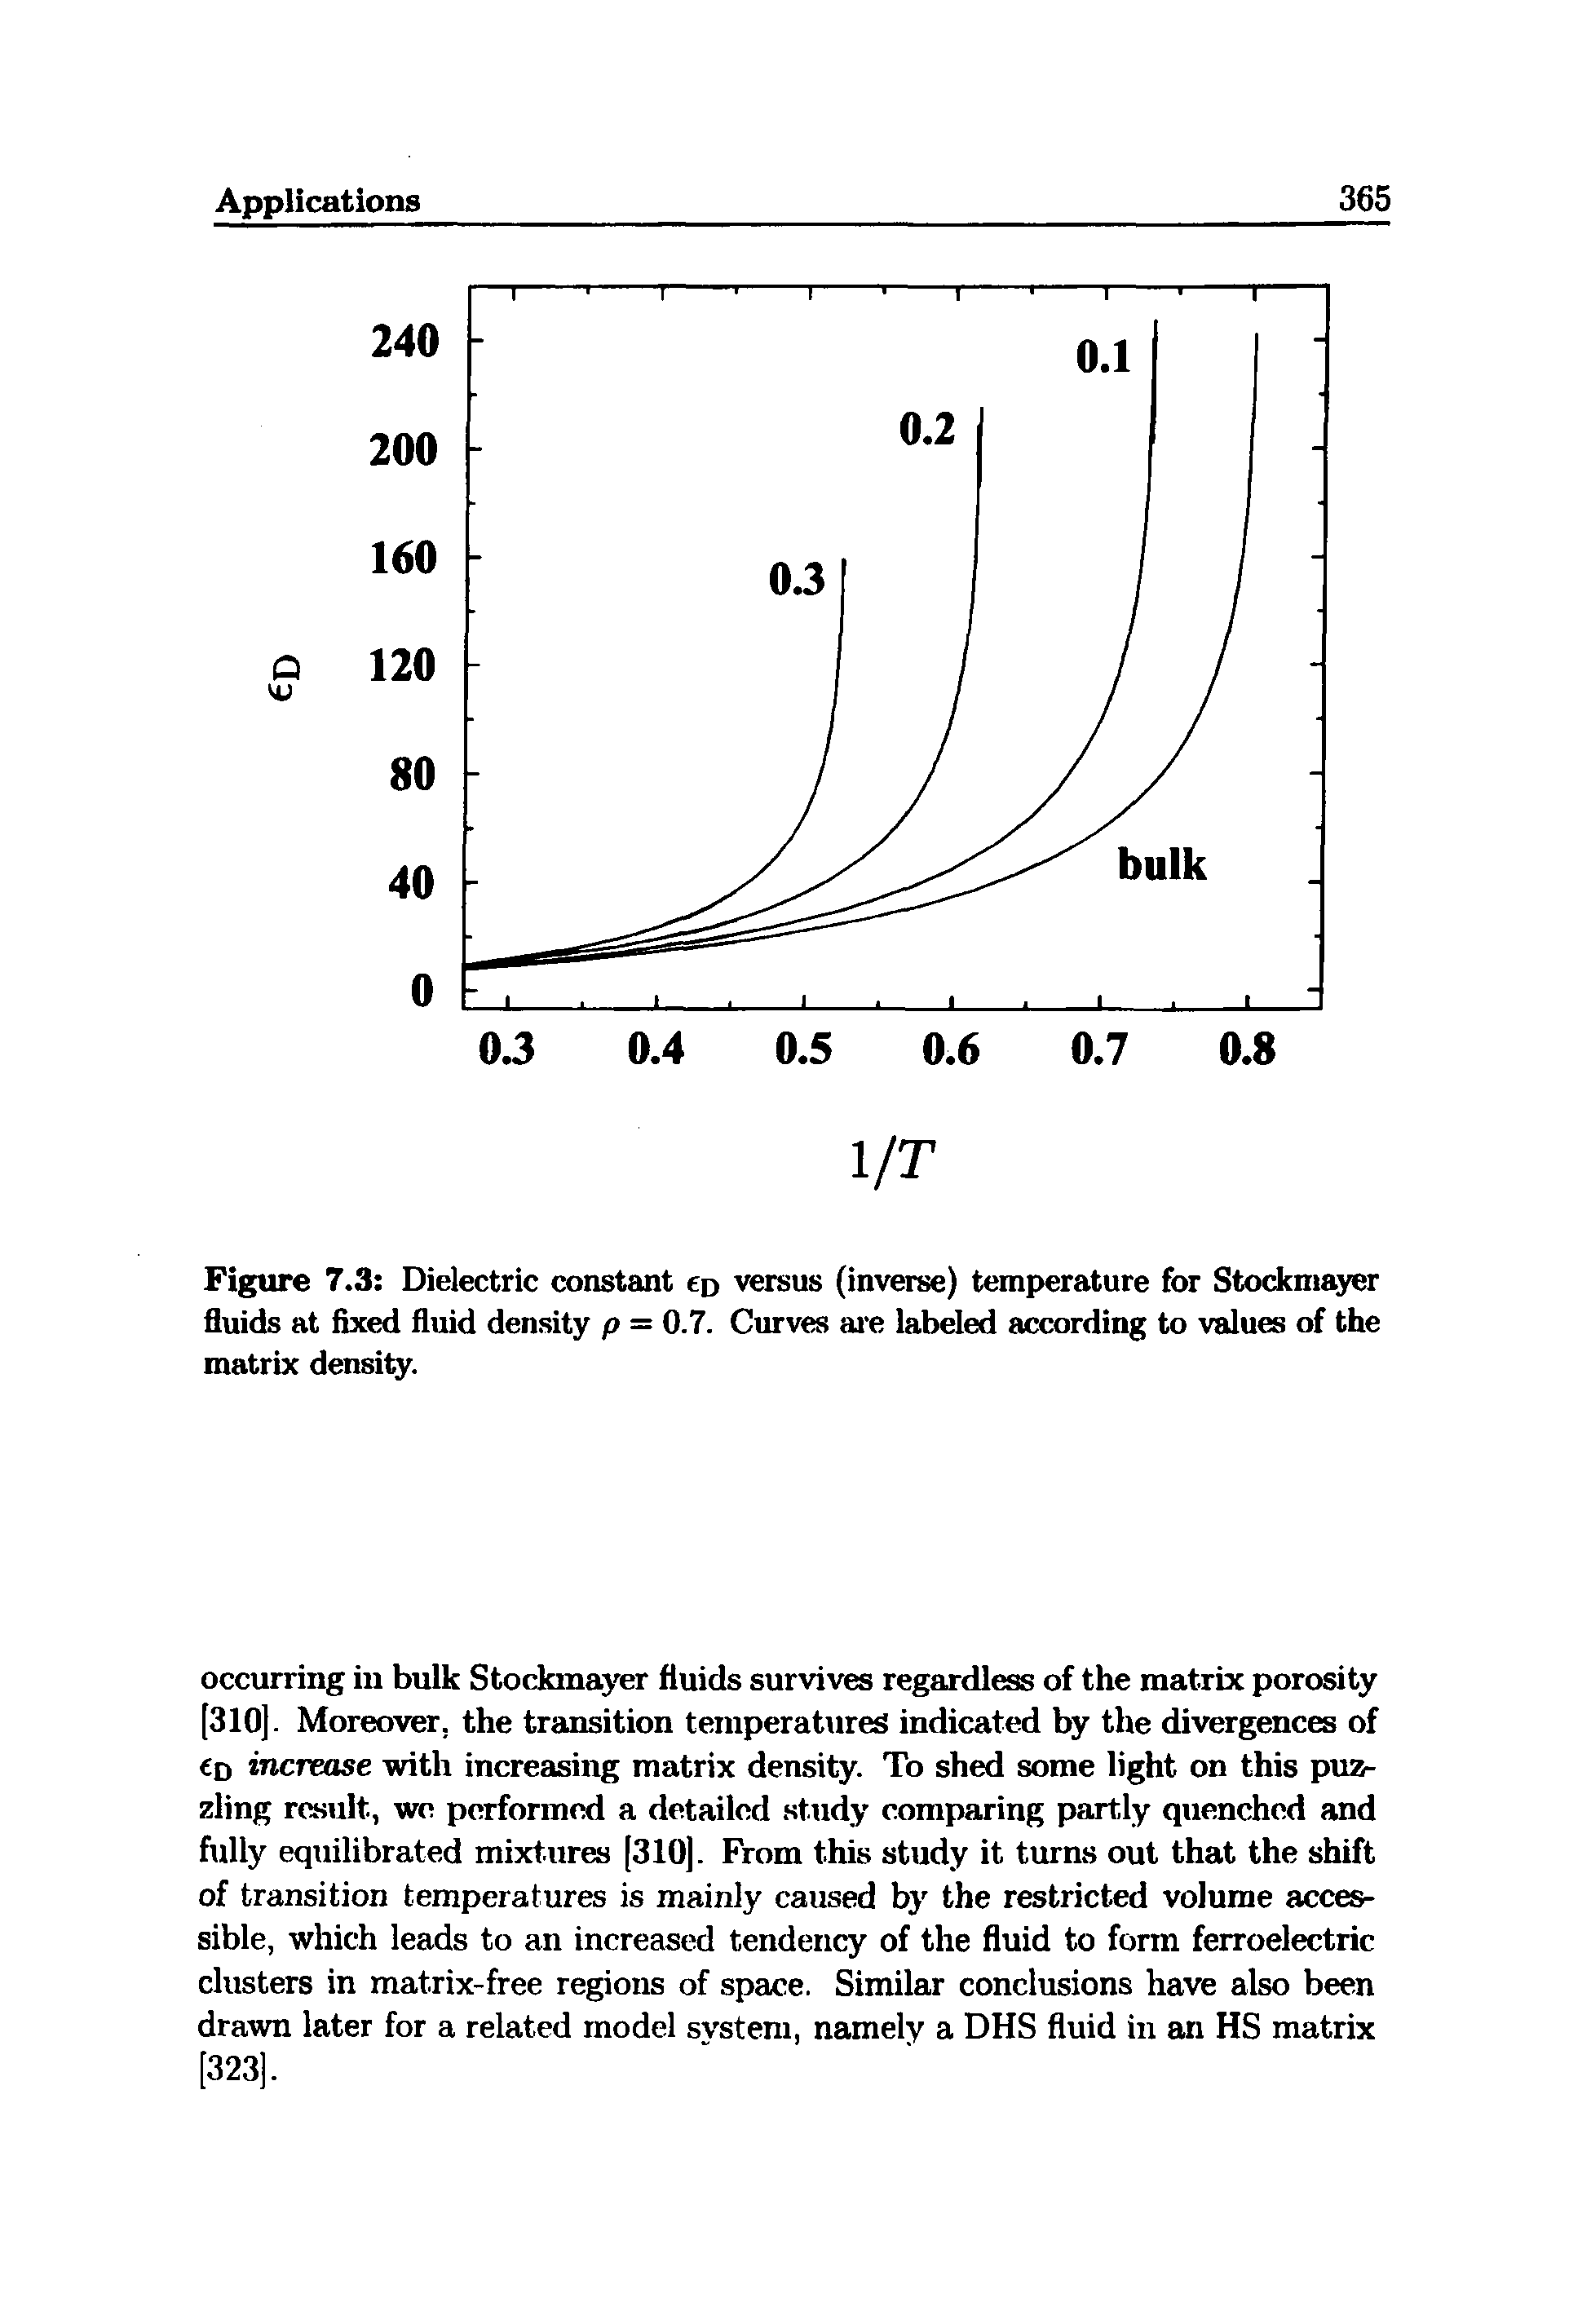 Figure 7.3 Dielectric constant ep versus (inverse) temperature for Stockmayer fluids at fixed fluid density p = 0.7. Curves aie labeled according to values of the matrix density.